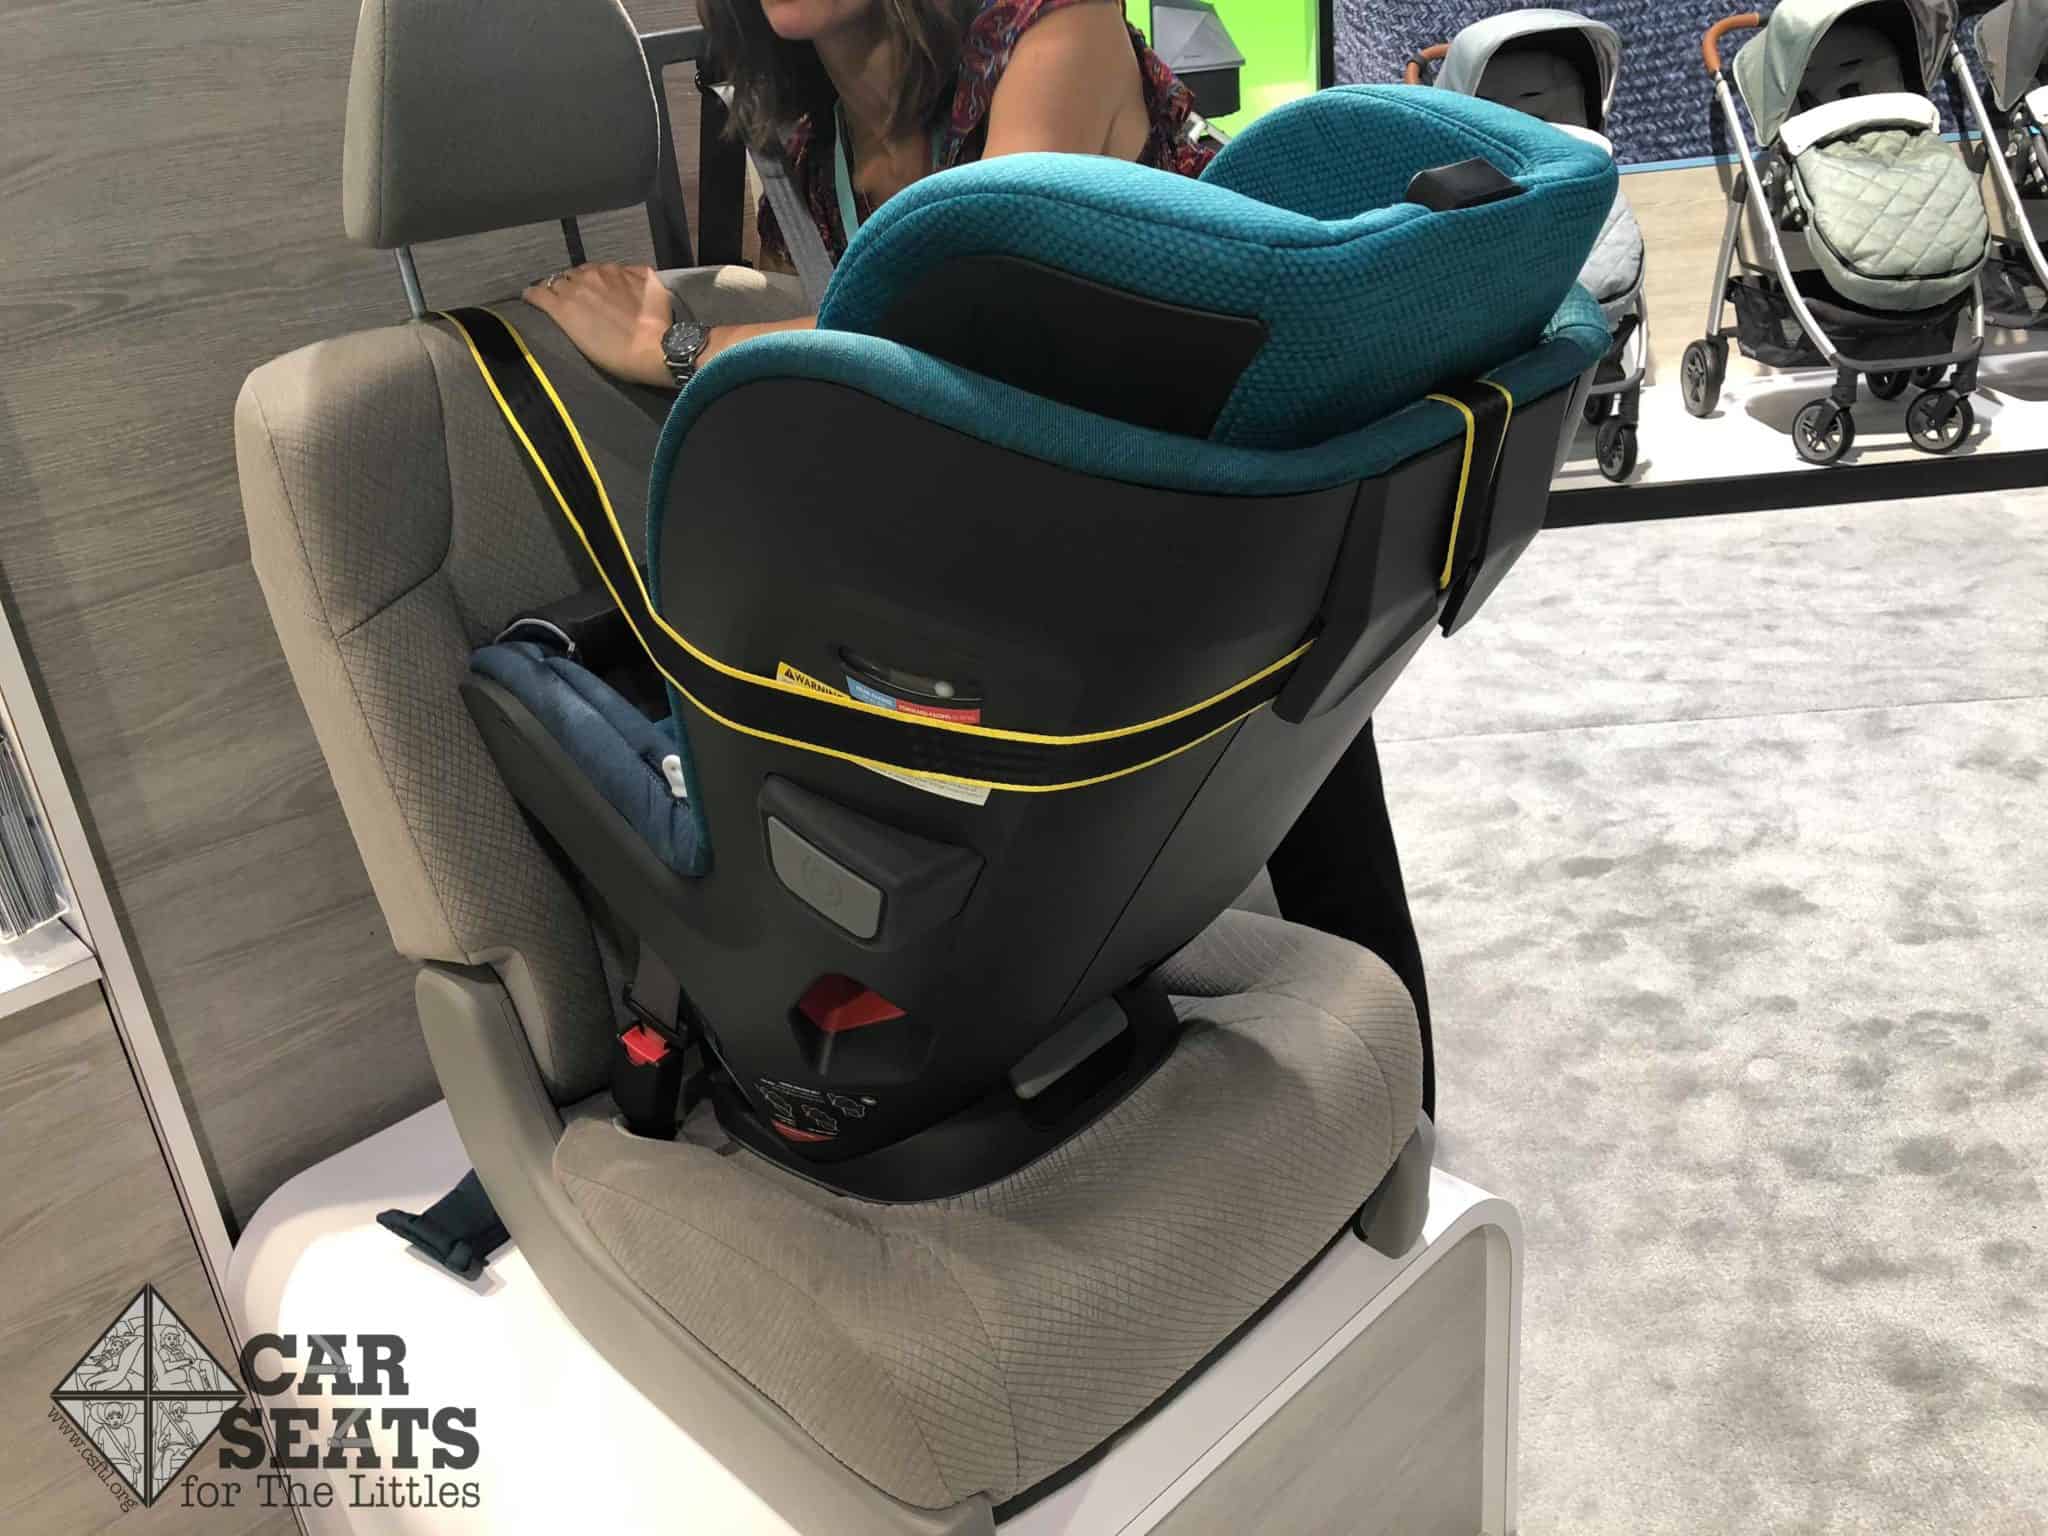 uppababy convertible car seat release date